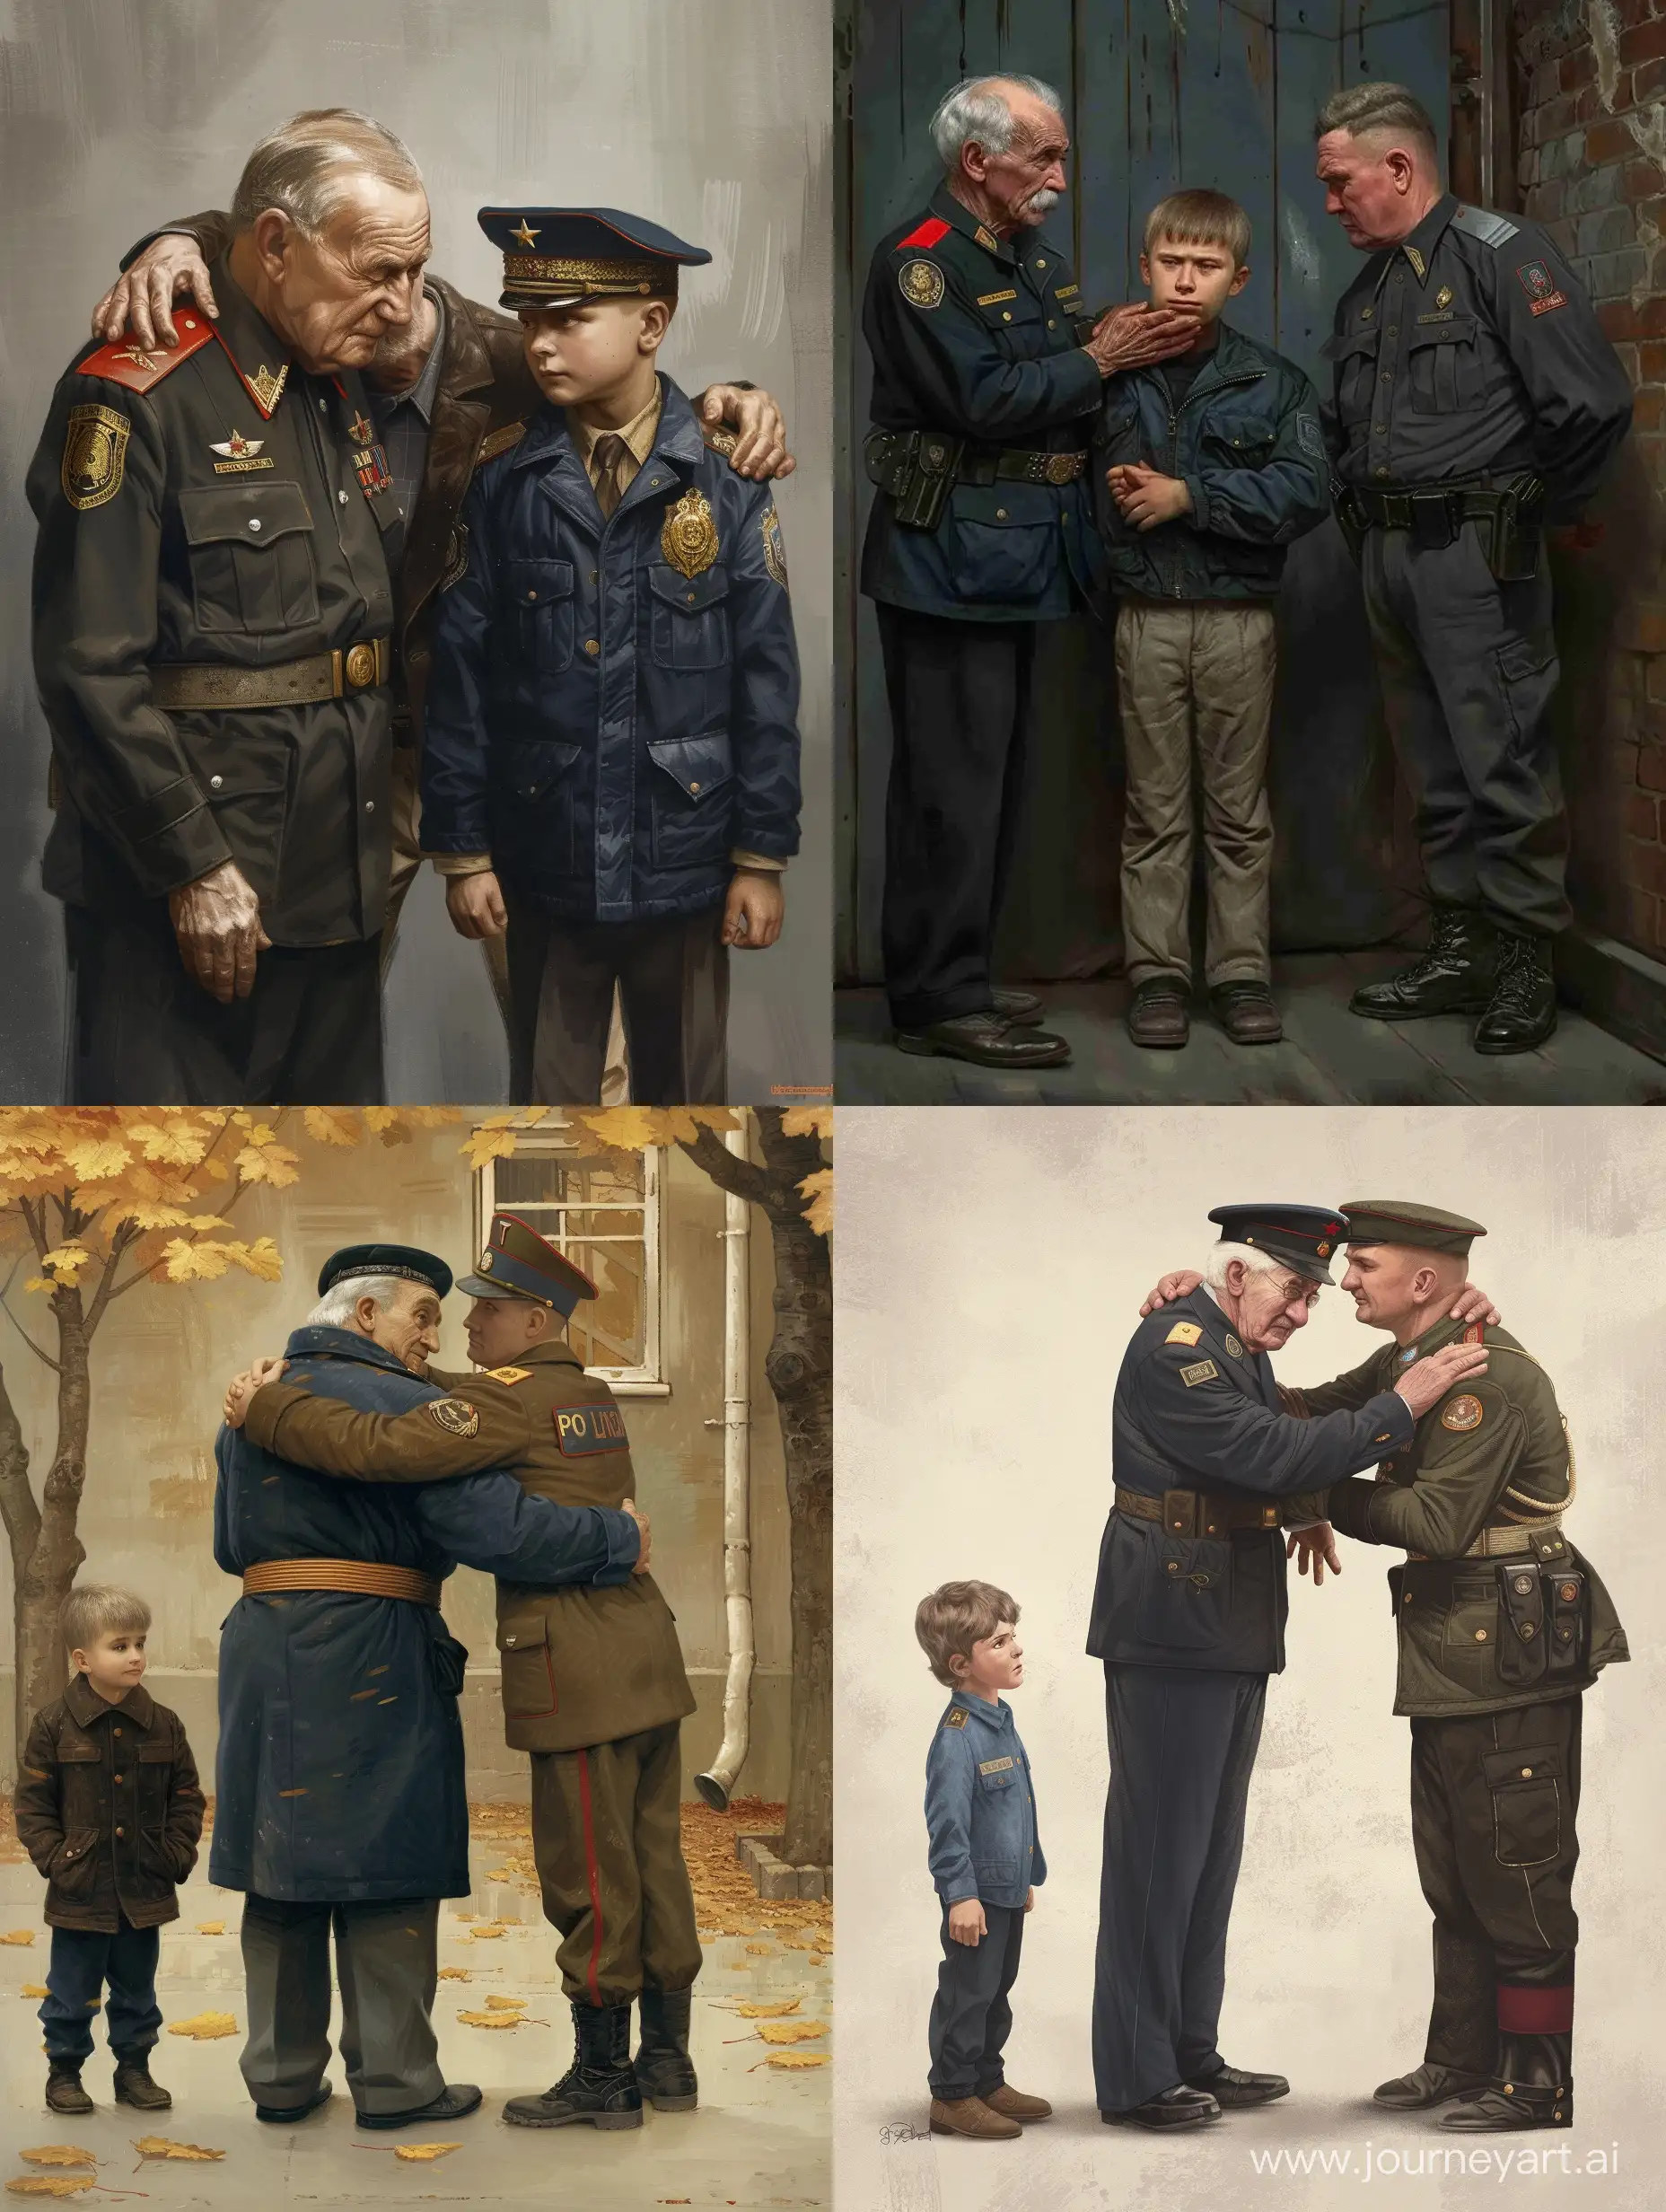 Russian-Police-Officer-Embraces-Army-Officer-with-Admiring-9YearOld-Nearby